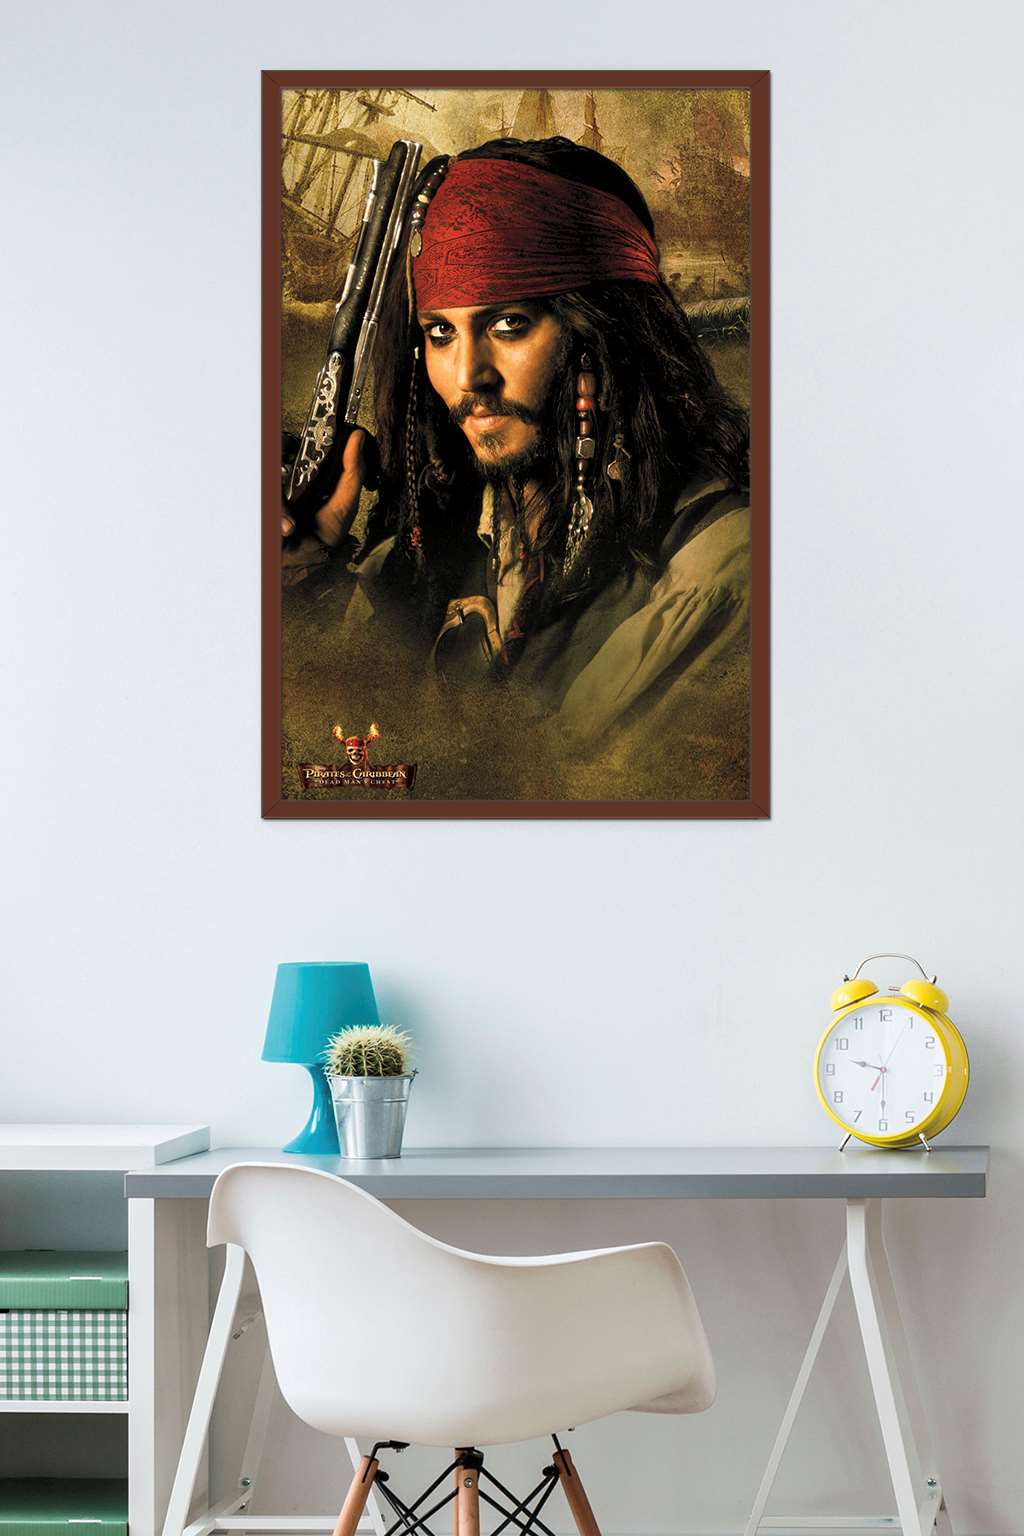 Disney Pirates of the Caribbean: Dead Man's Chest - Johnny Depp Wall Poster, 22.375" x 34", Framed - image 2 of 2